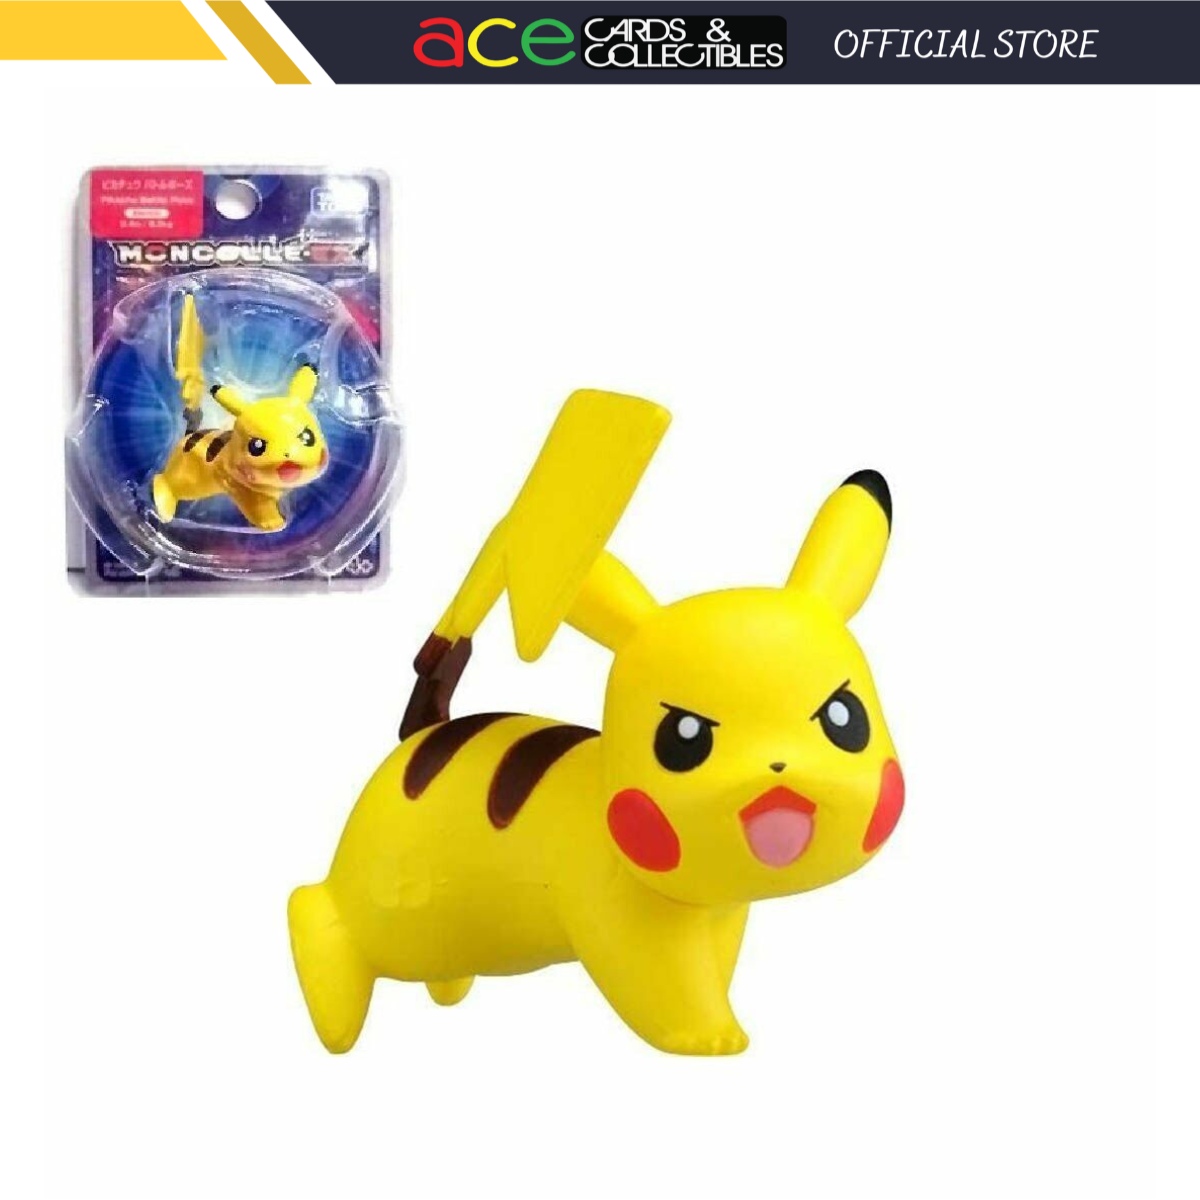 Pokemon Moncolle Ex Asia Ver "Pikachu Battle Pose" Ex Asia Ver #26-Takara Tomy-Ace Cards & Collectibles